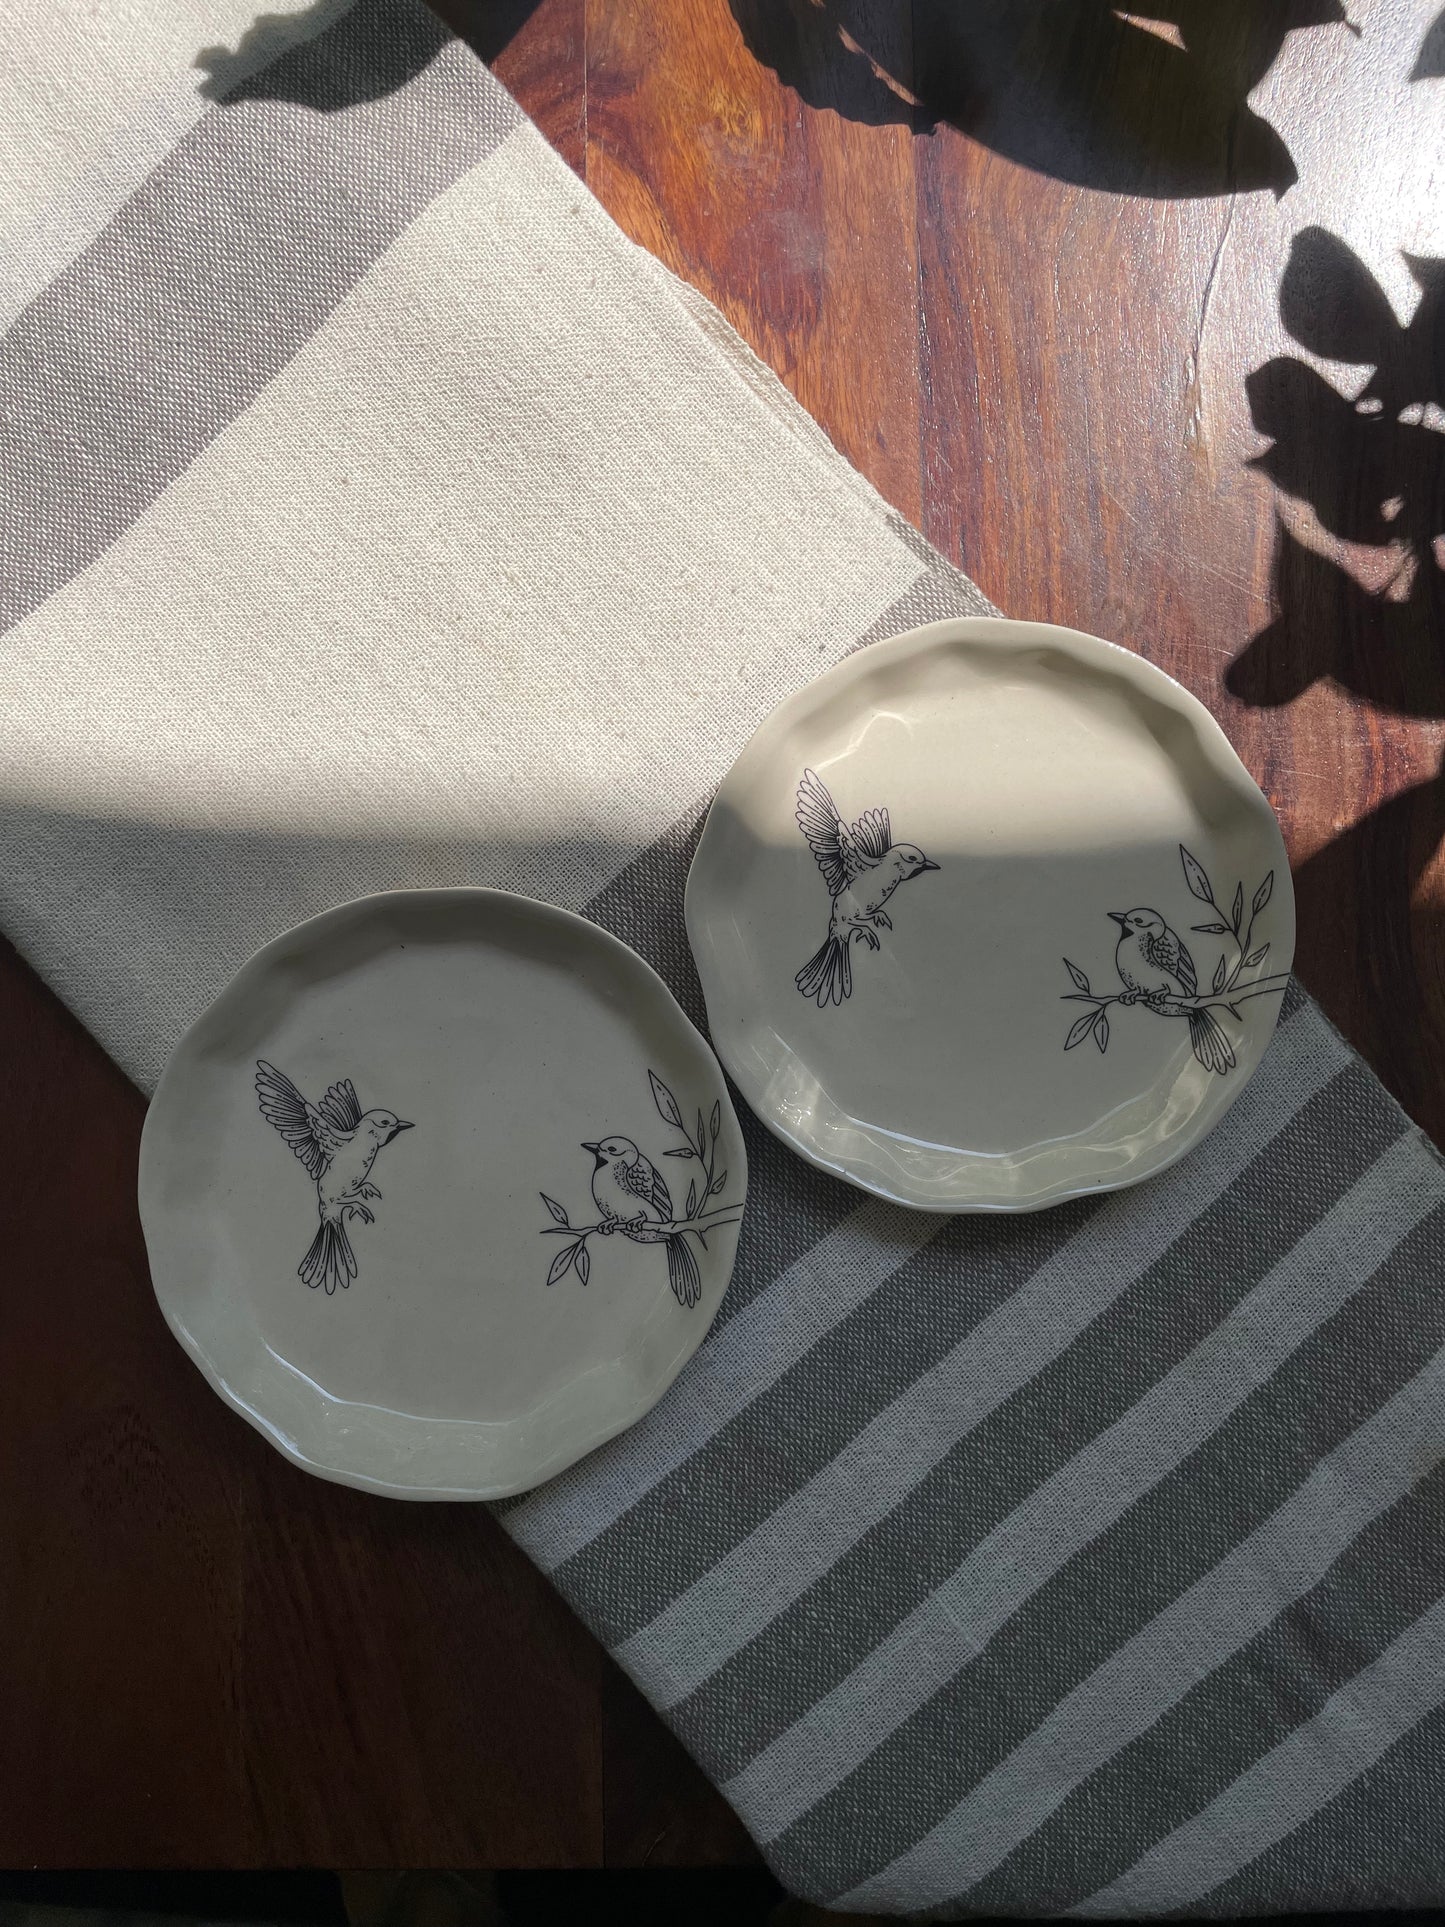 Top view of 2 small off-white ceramic plates with bird designs on a striped runner, with a wooden table and leaf shadow. Buy ceramics for Indian homes